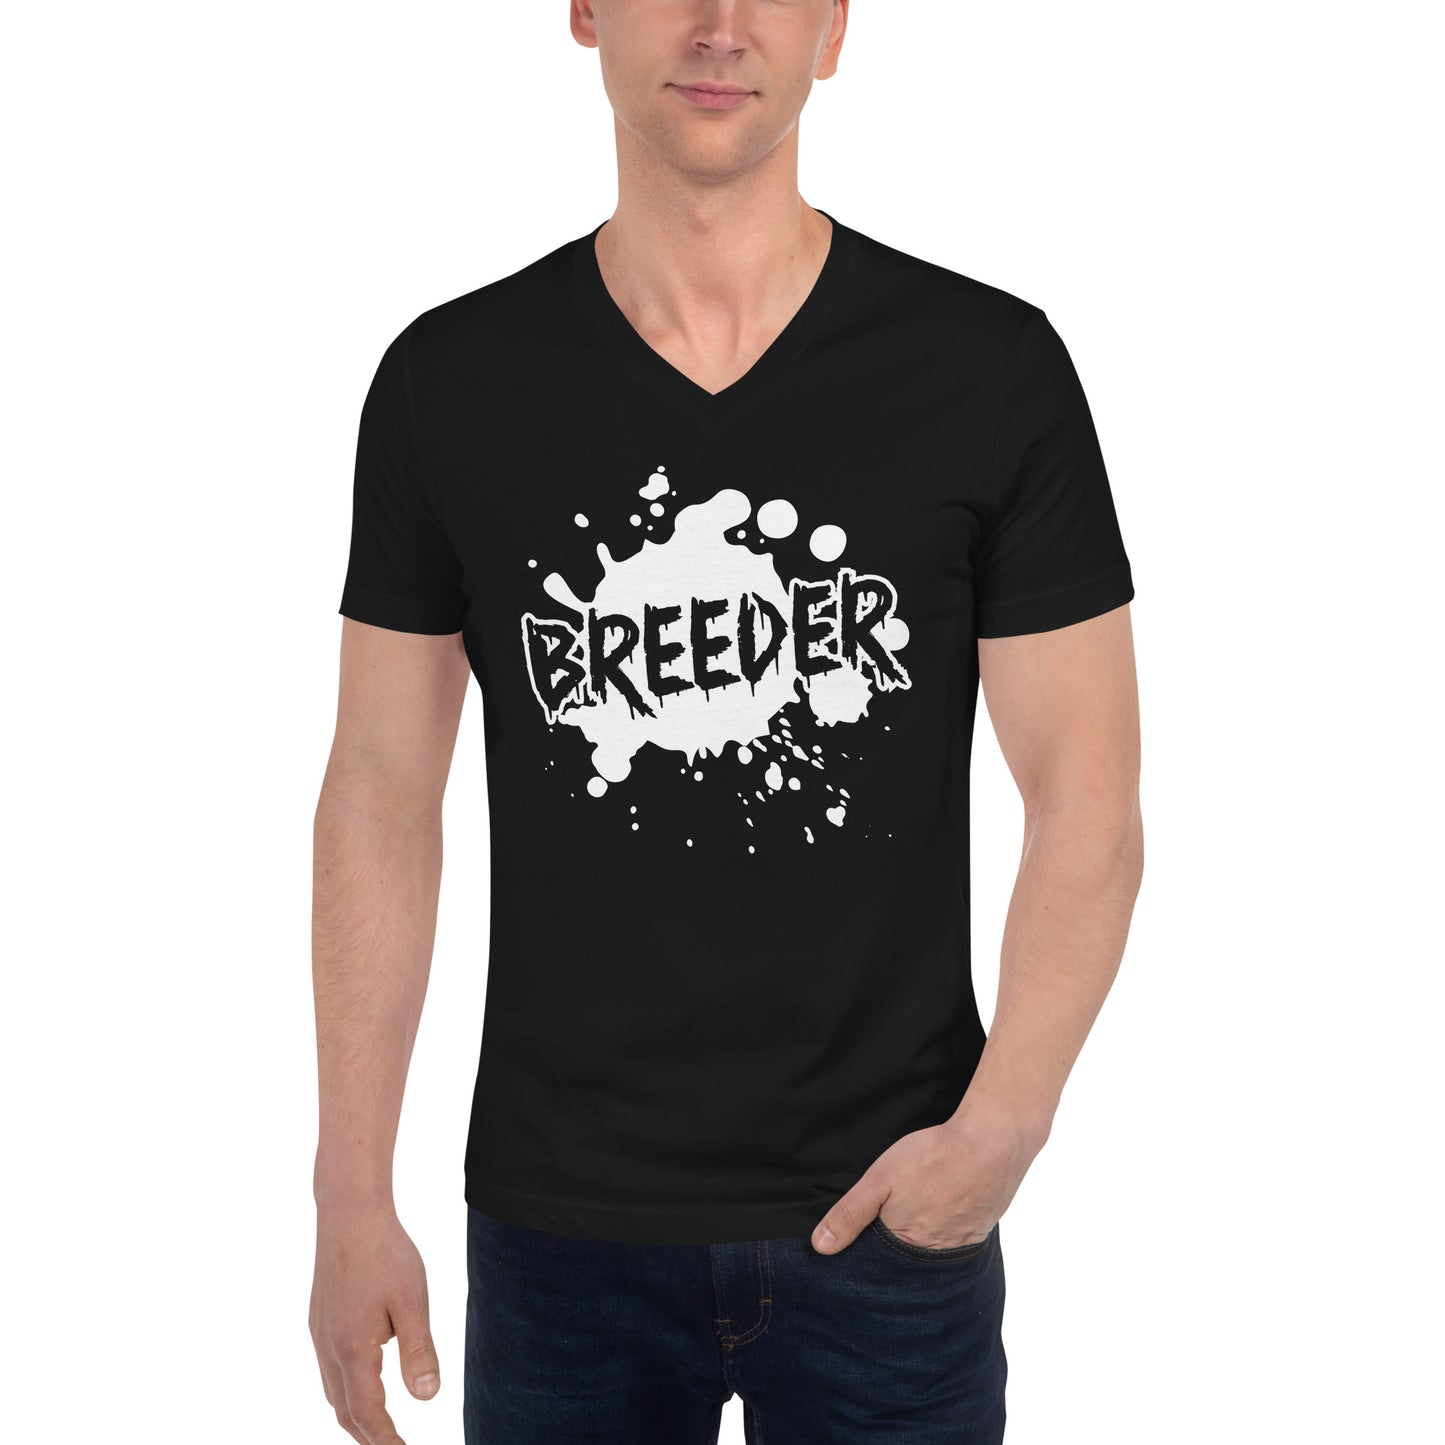 Shop the empowering 'Breeder' unisex short sleeve V-neck T-shirt, a bold fashion choice for expressing your confidence as a gay top. Celebrate your role with this stylish and inclusive tee.